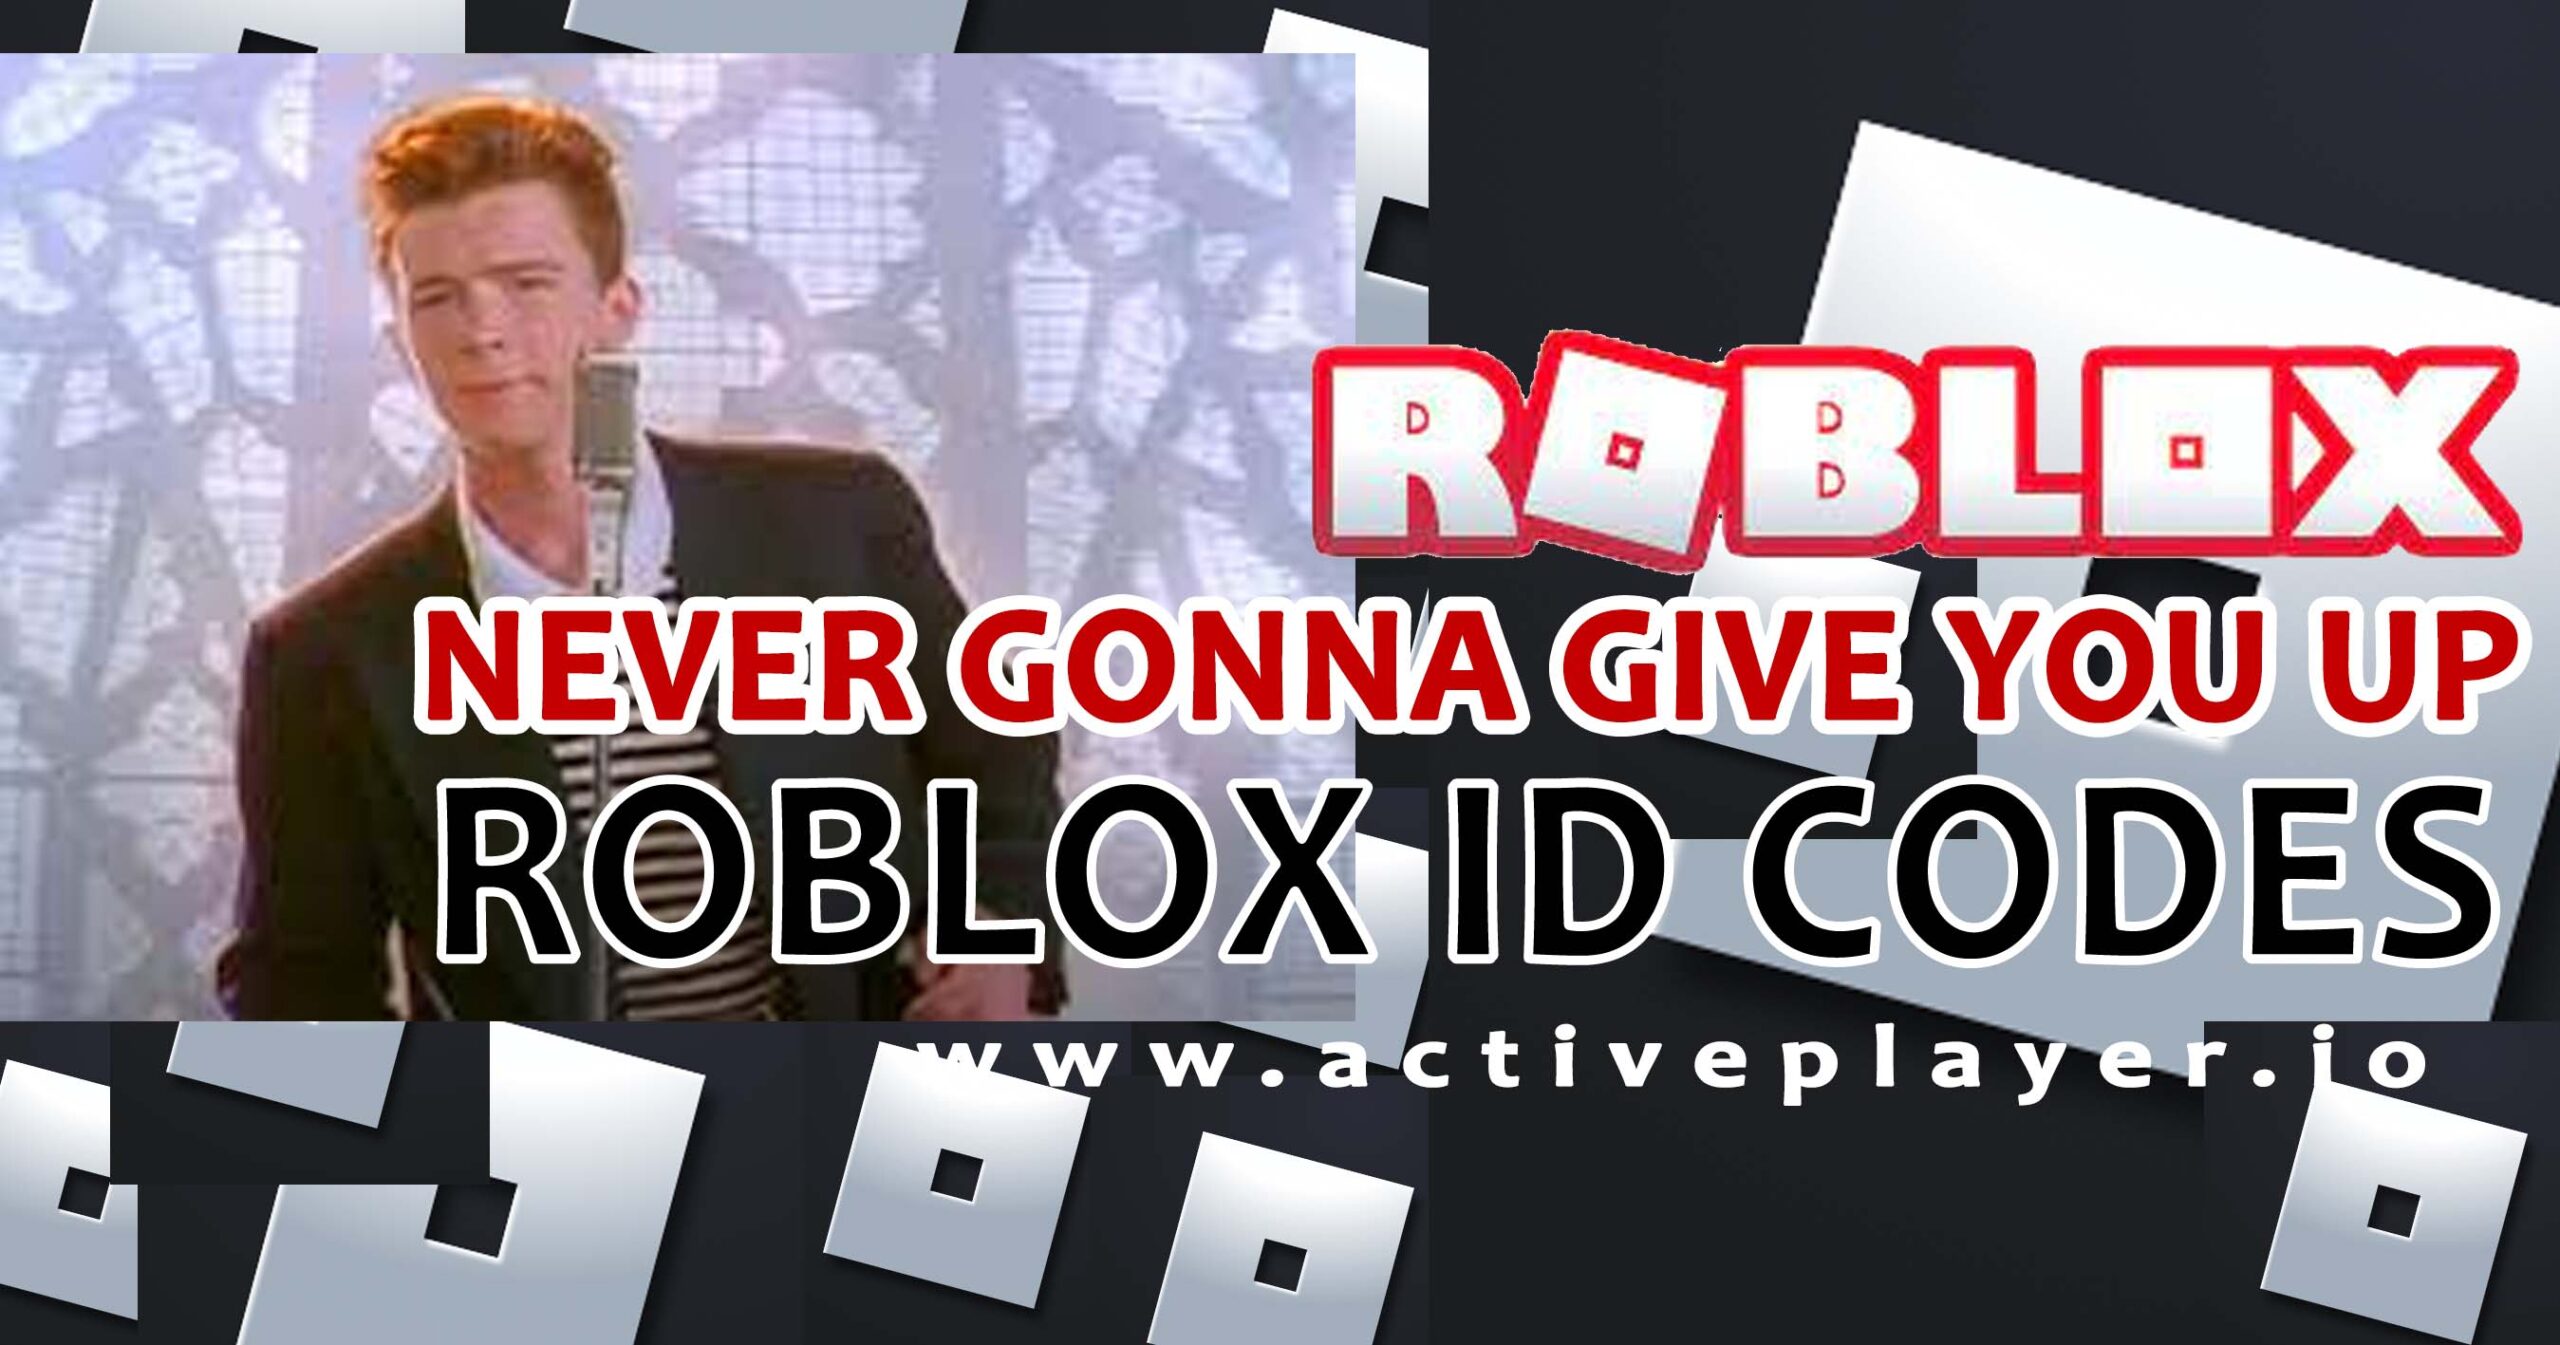 Get] Never Gonna Give You Up Roblox Id Codes - The Game Statistics  Authority : Activeplayer.Io